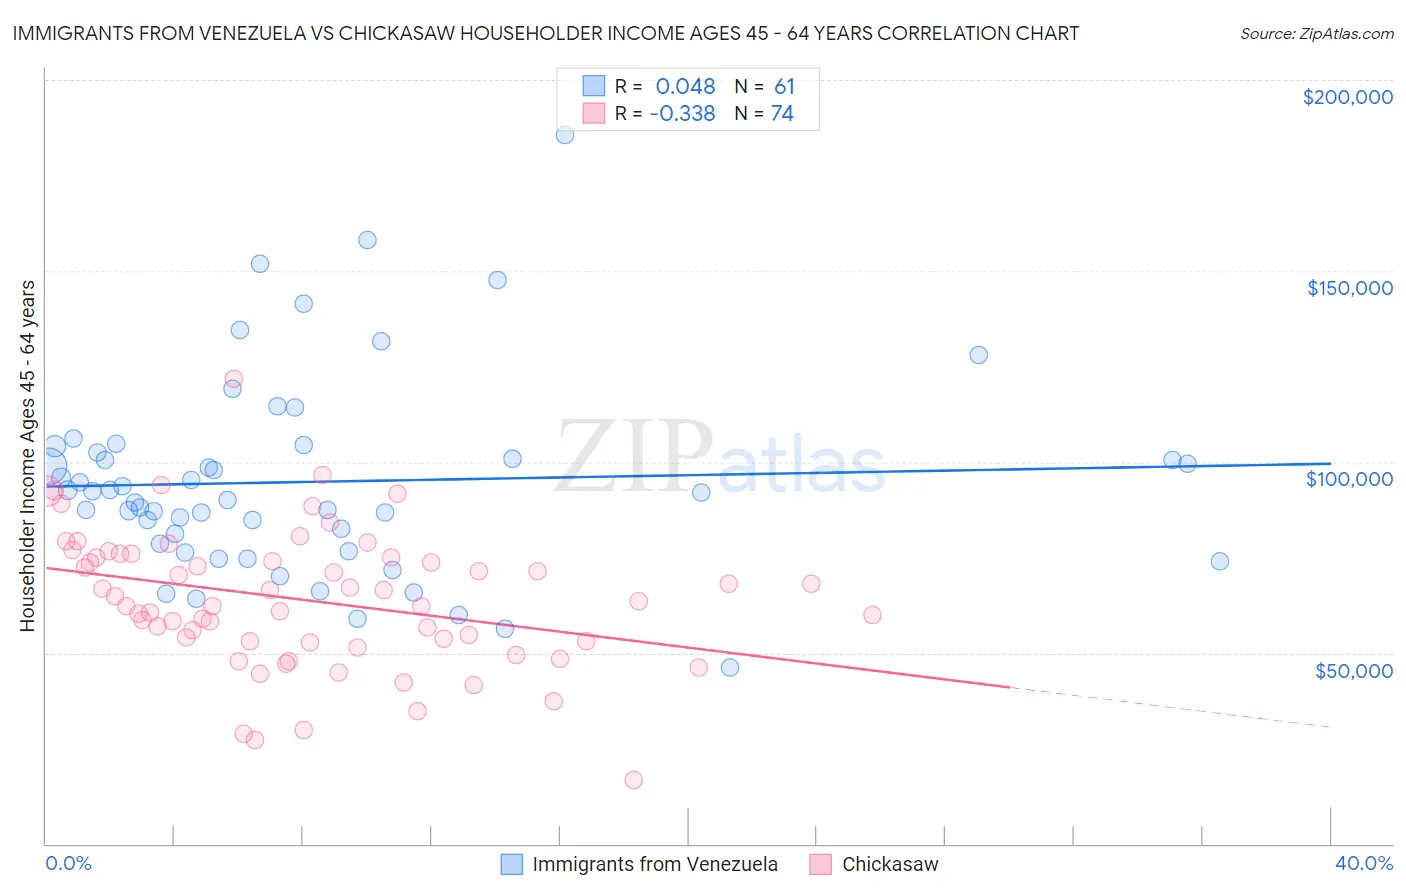 Immigrants from Venezuela vs Chickasaw Householder Income Ages 45 - 64 years